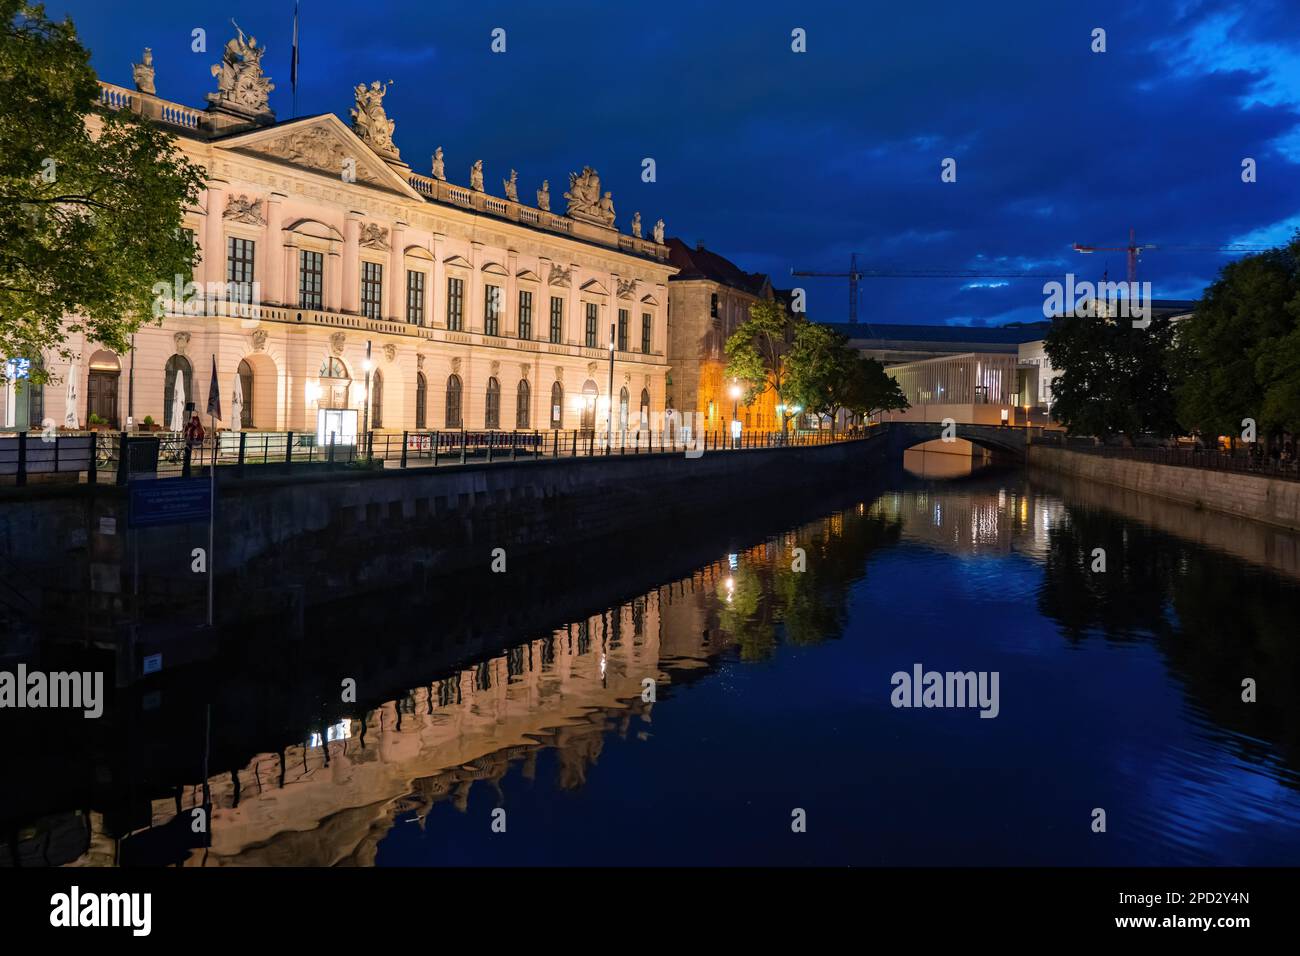 The German Historical Museum (German: Deutsches Historisches Museum, DHM) at night in city of Berlin, Germany. Stock Photo